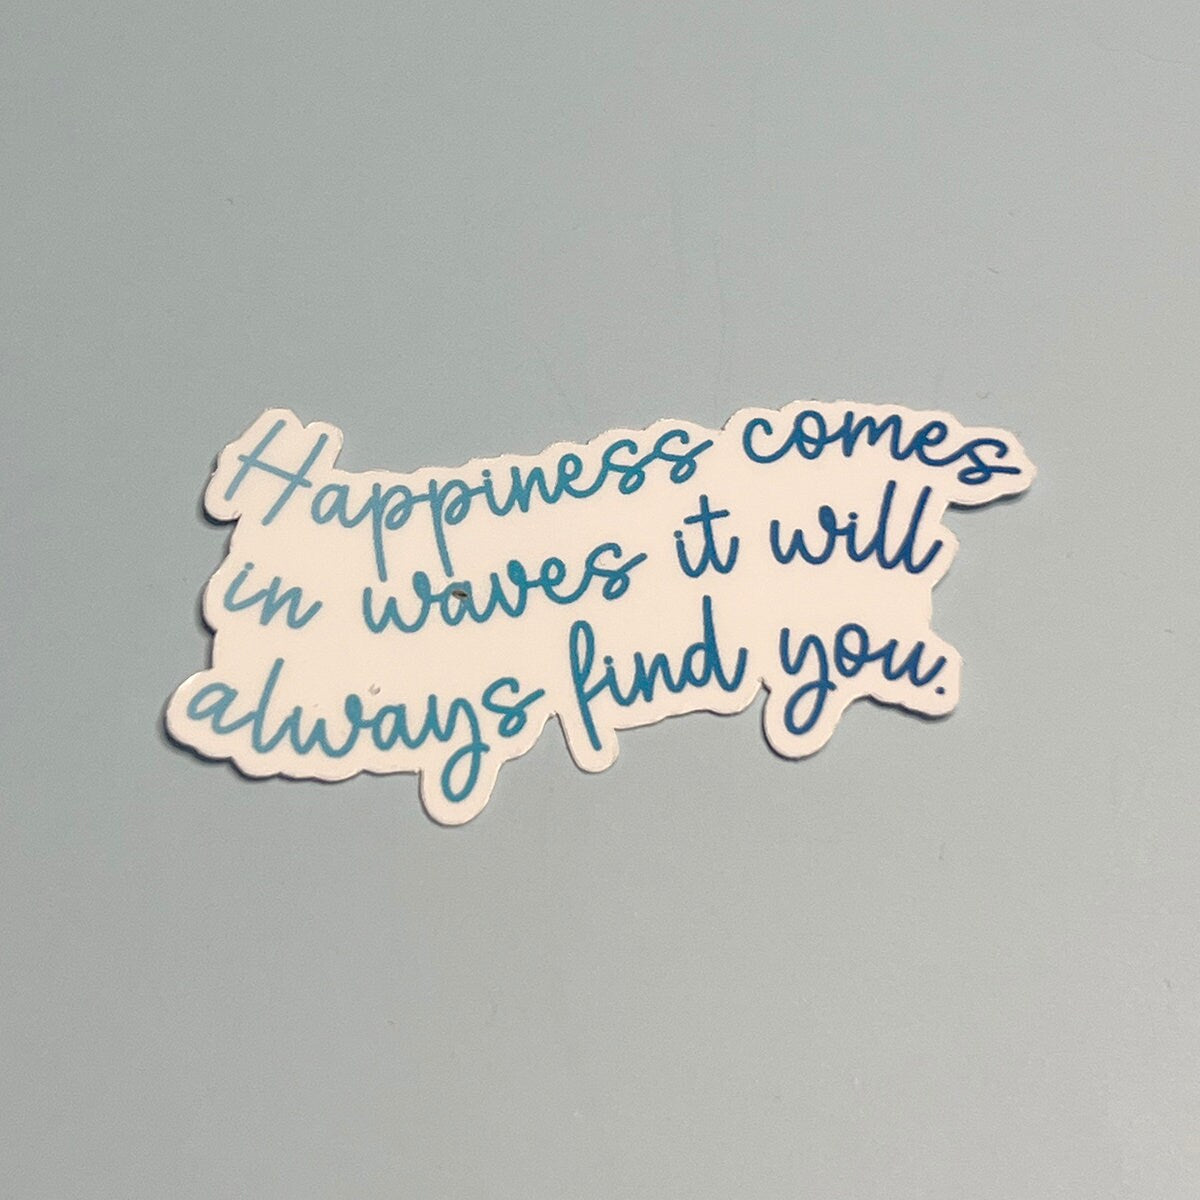 Happiness Come in Wave it will always find you - Waterproof Sticker